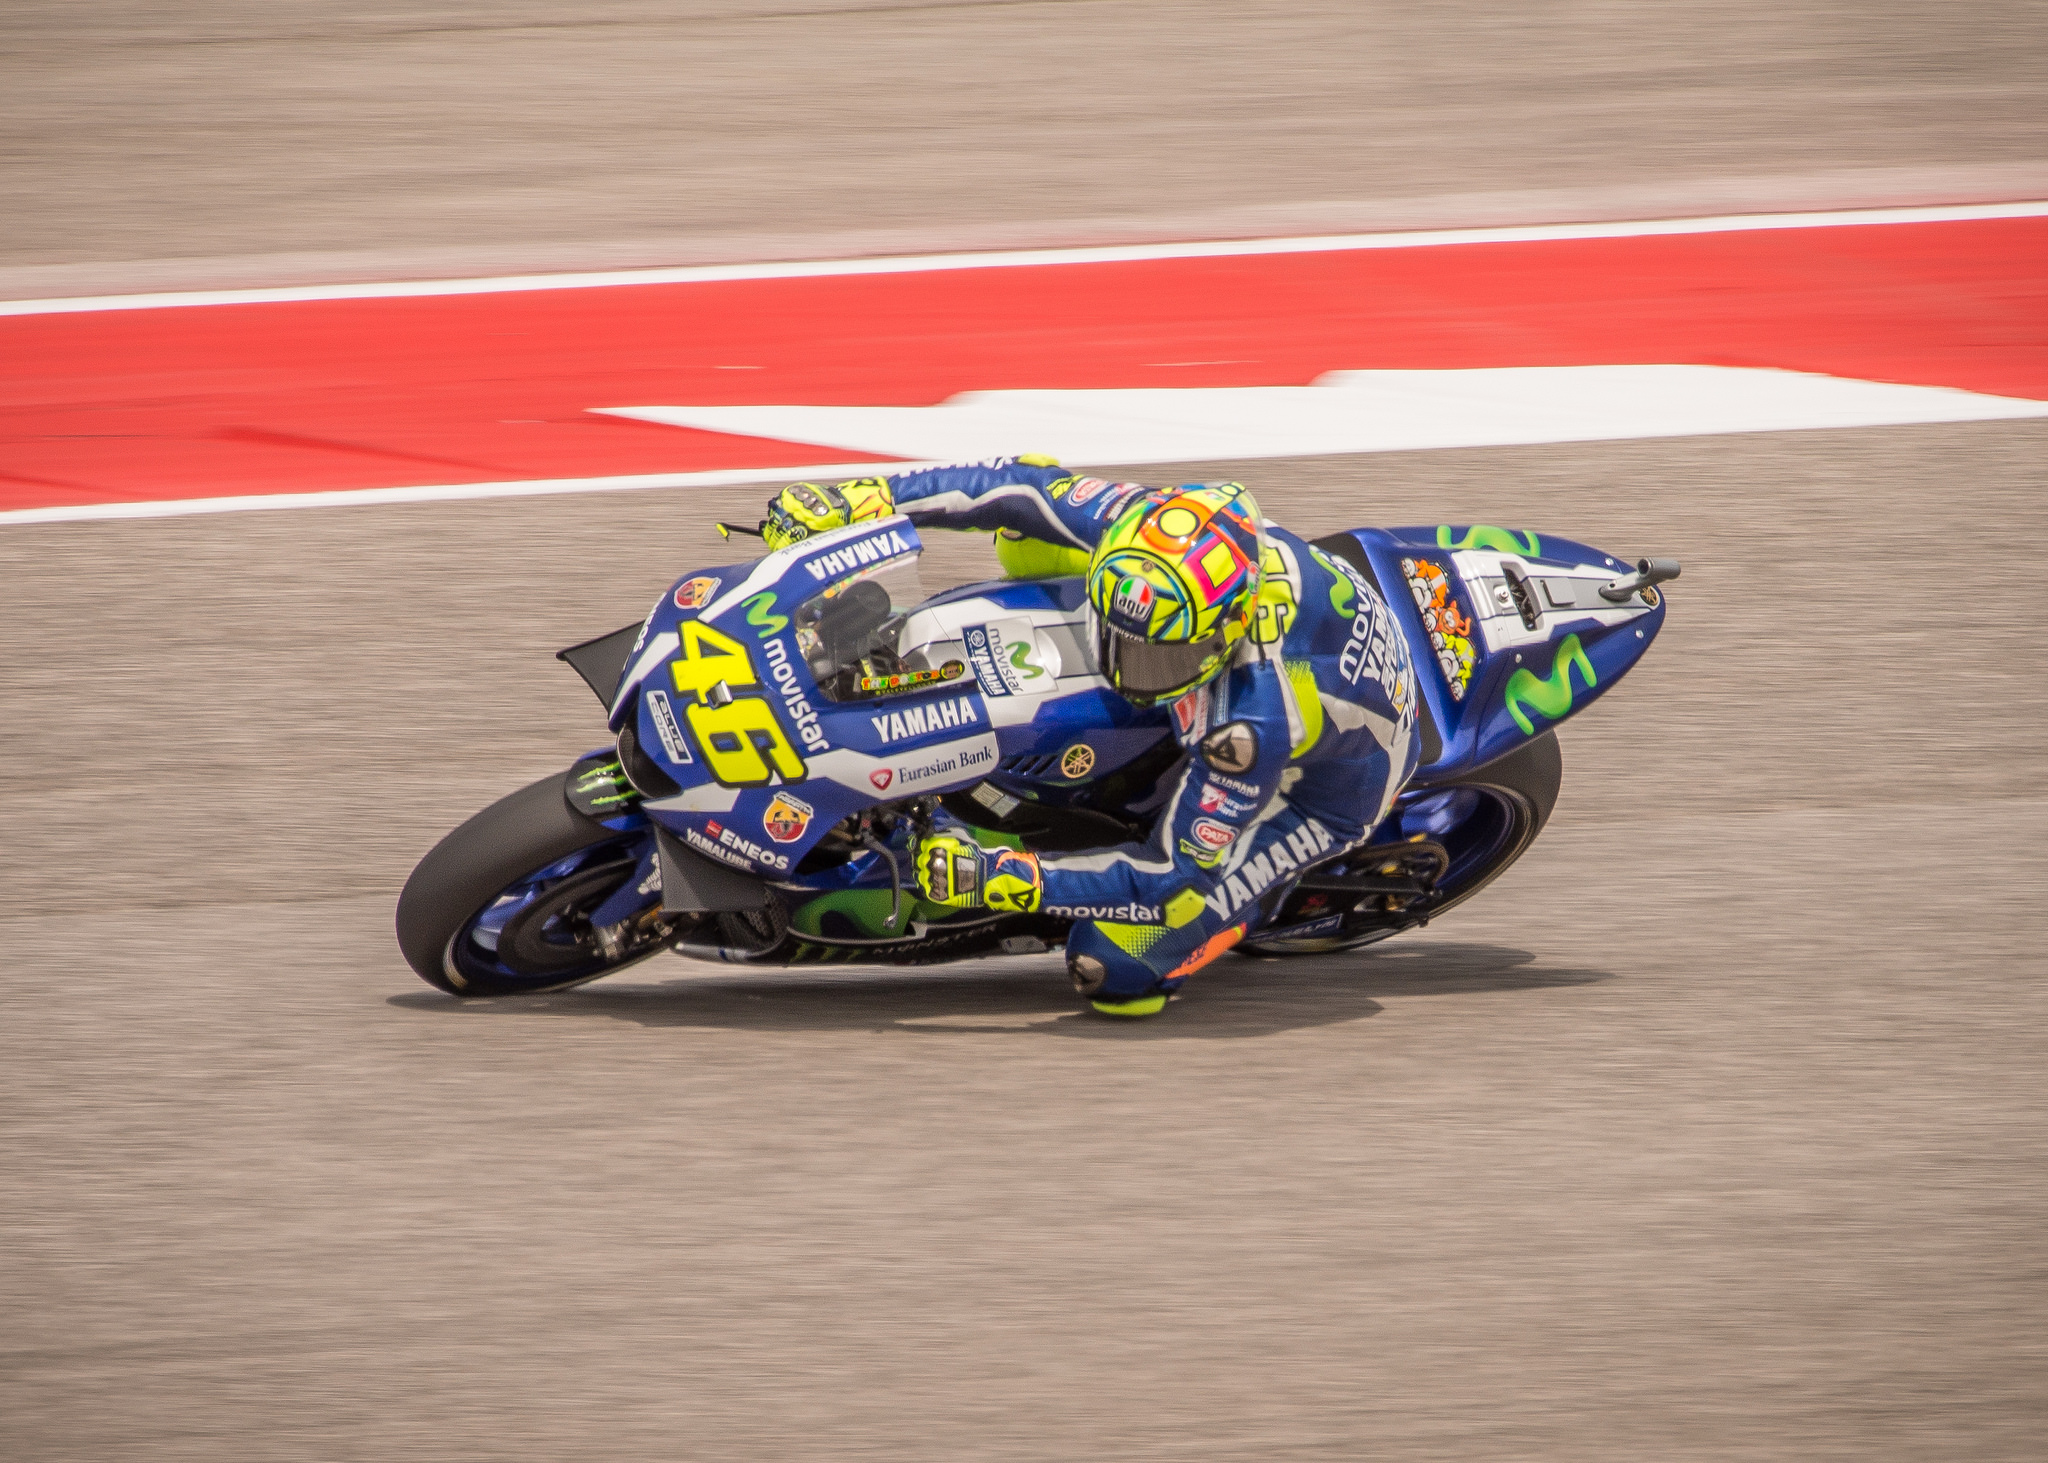 Valentino Rossi image courtest of Joe McGowan on flickr